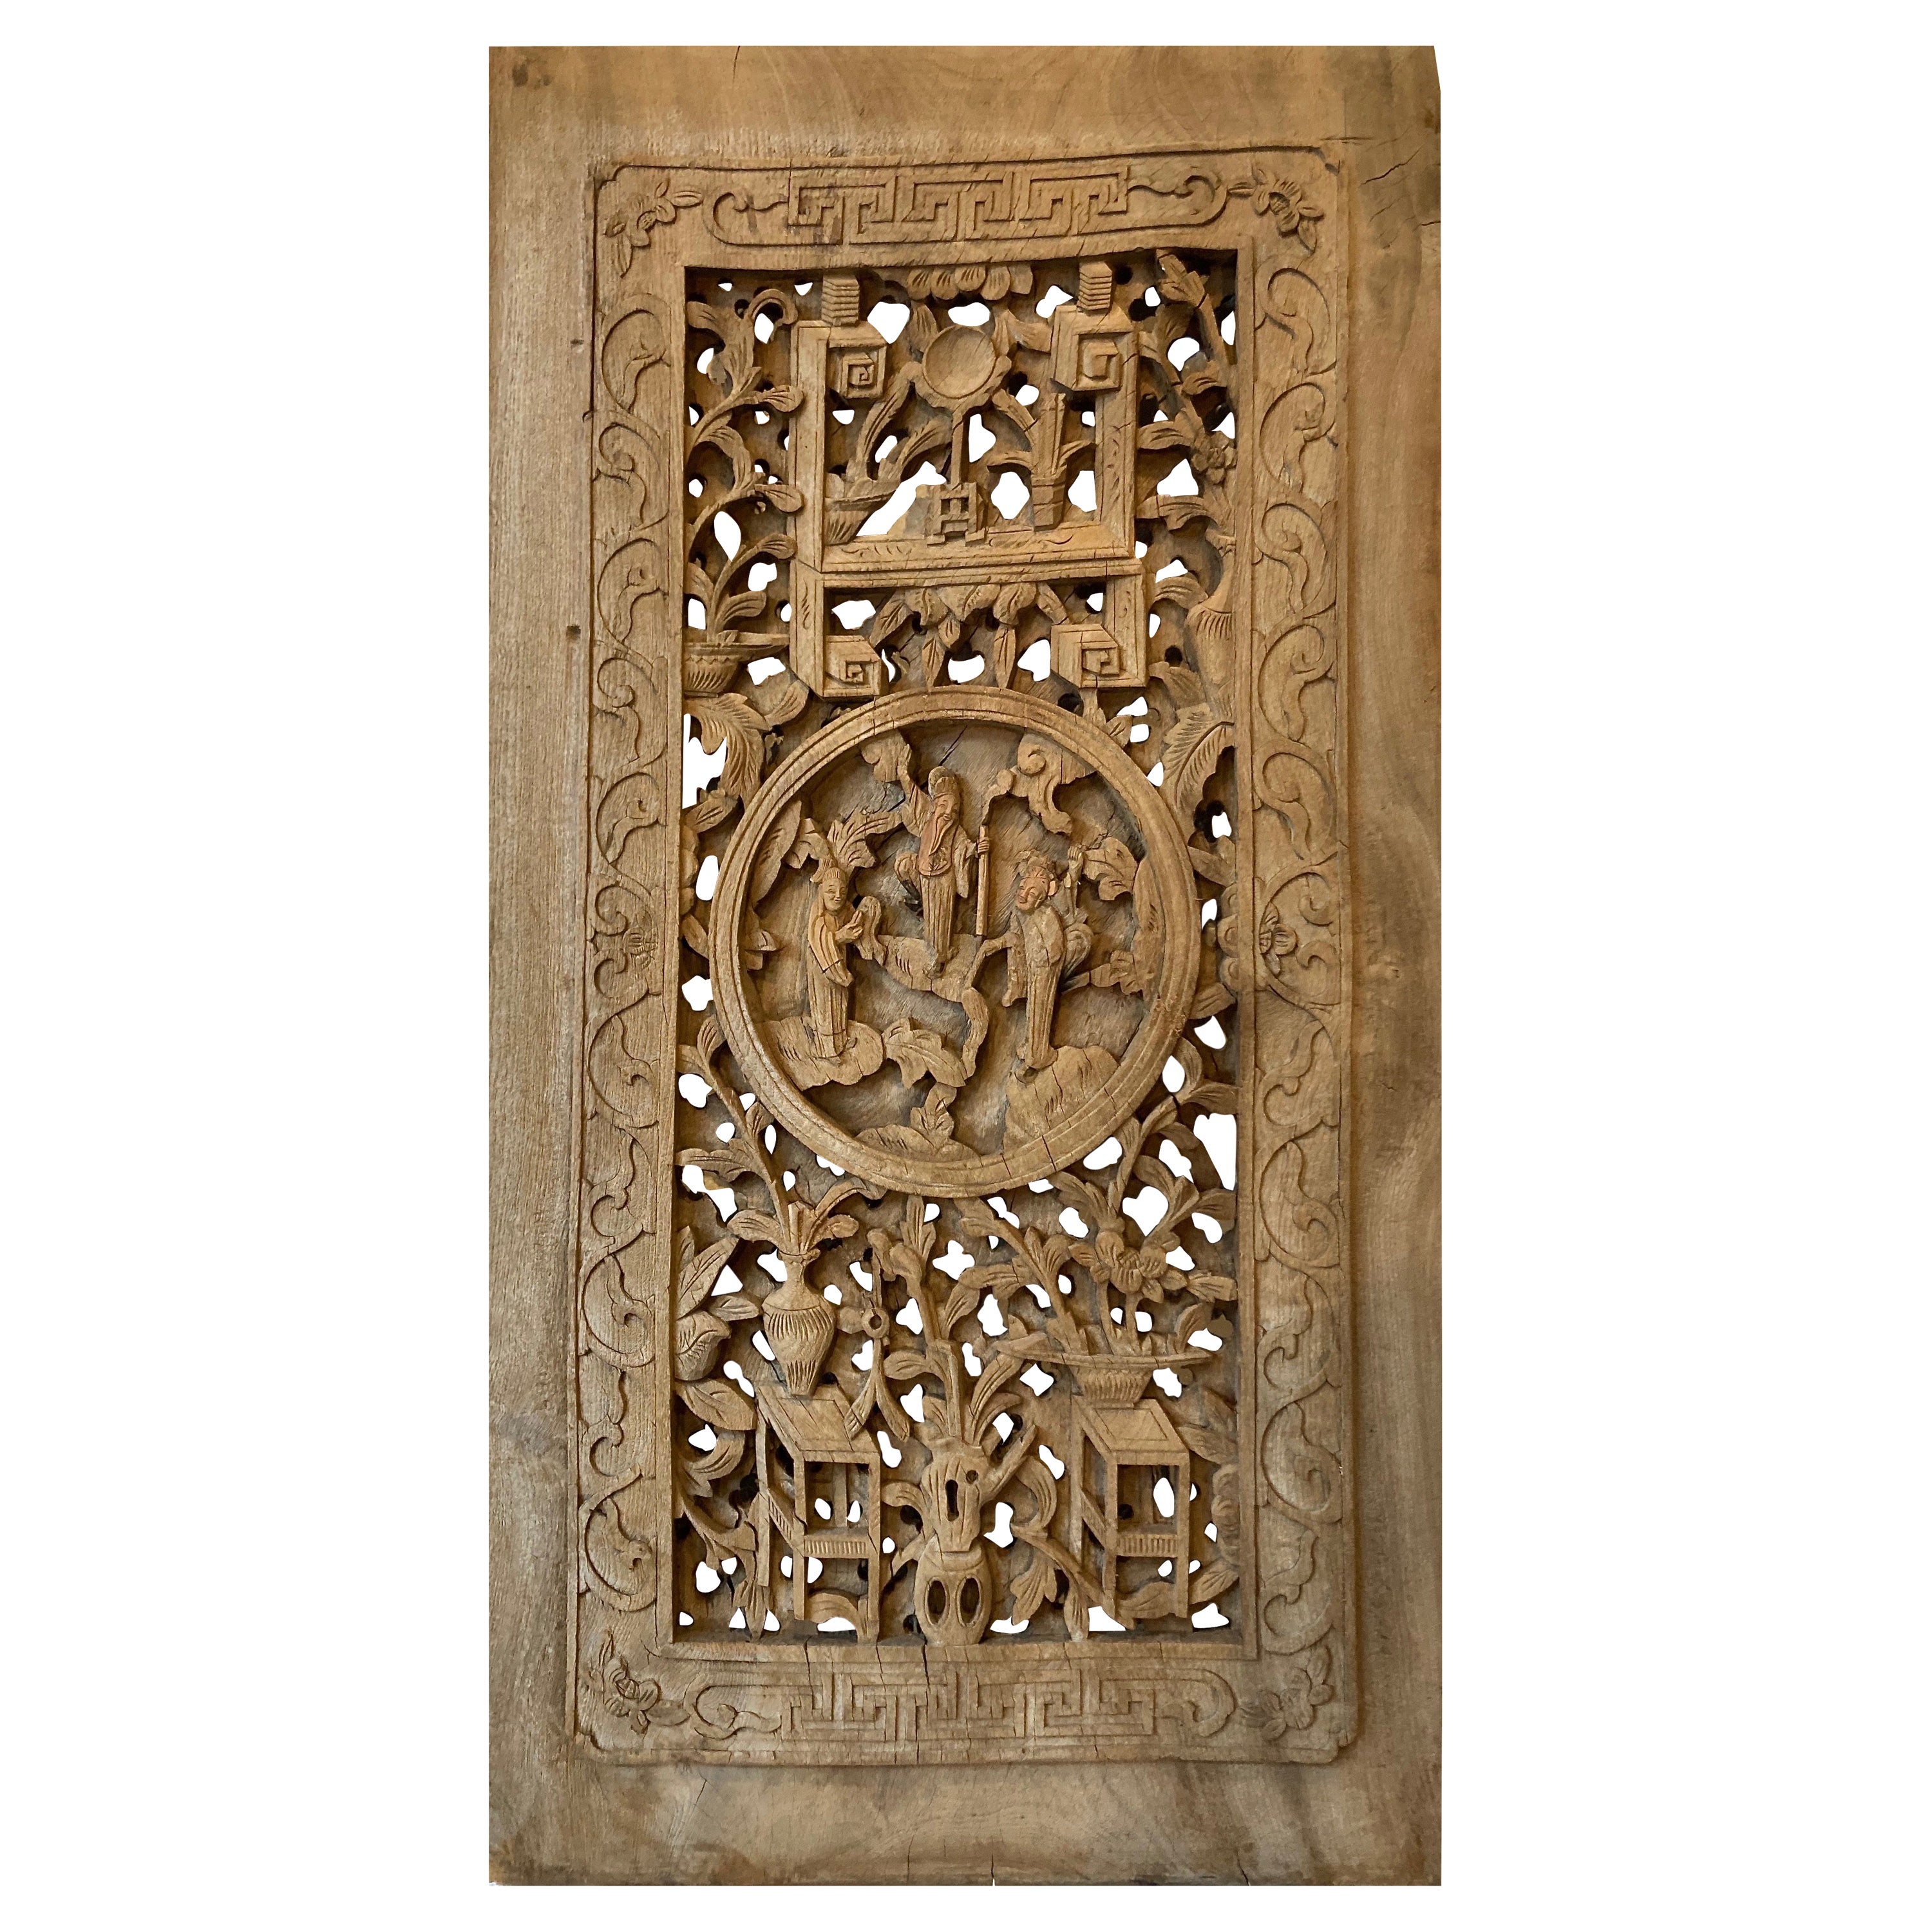 Antique Chinese Carved Wood Window Panel For Sale